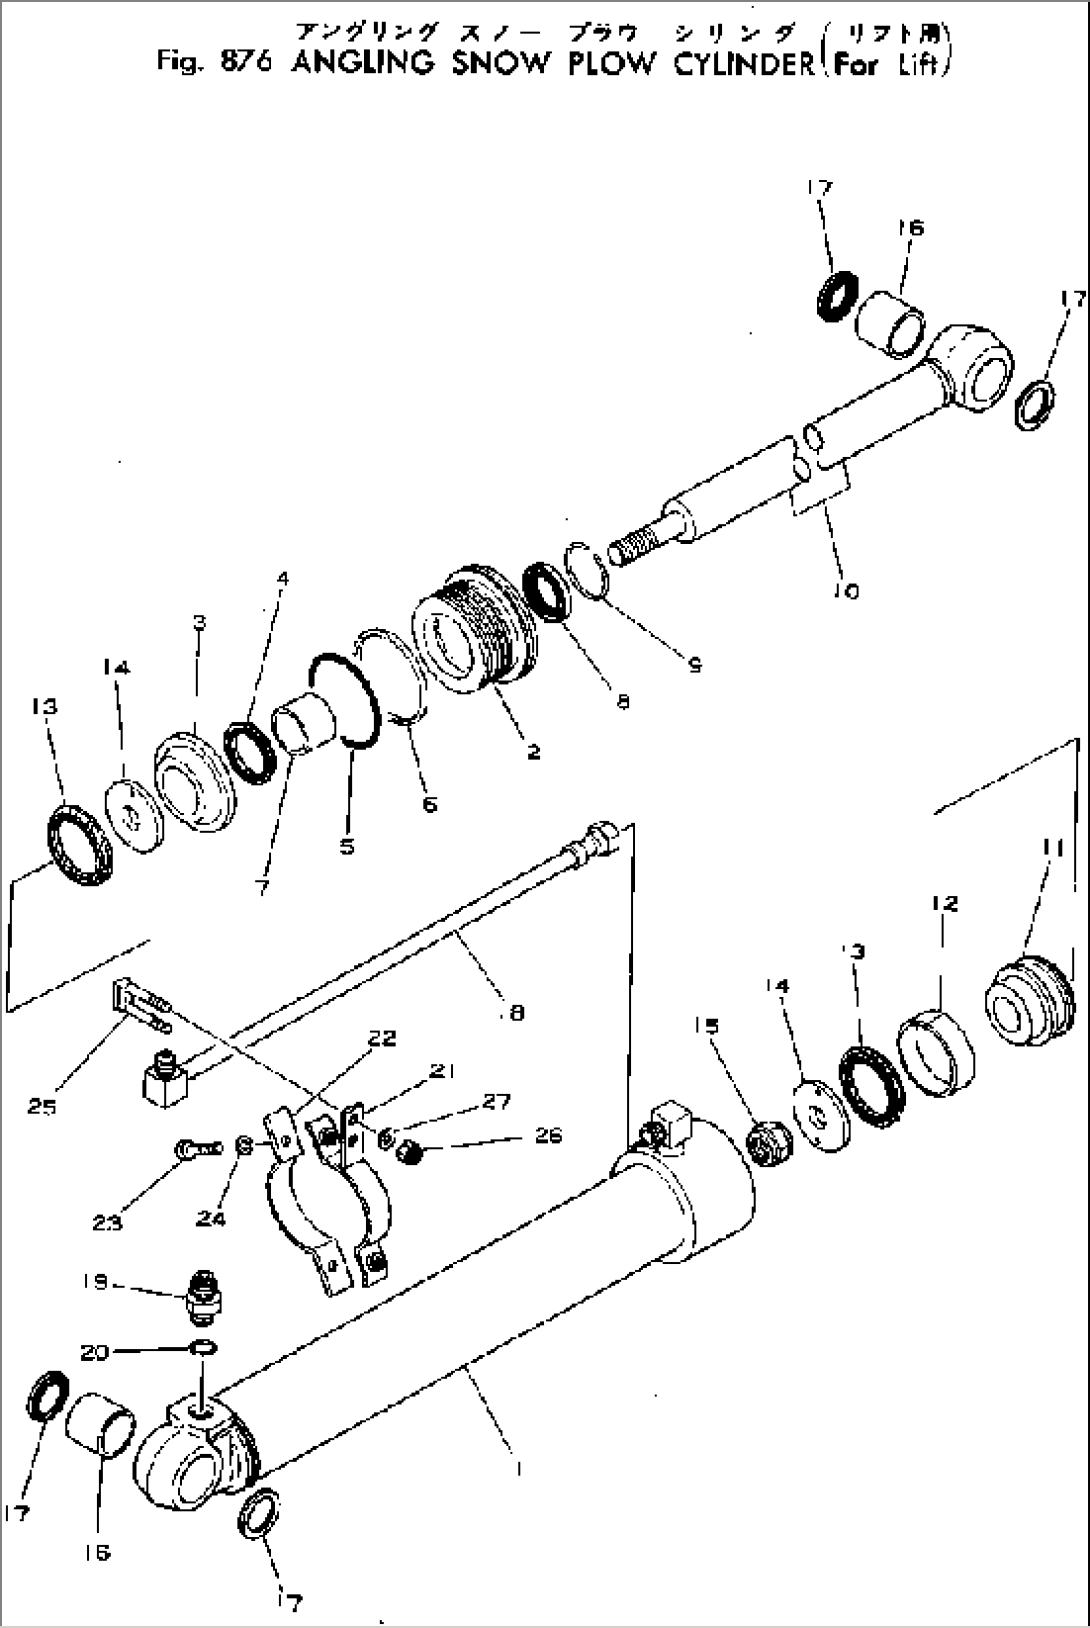 ANGLING SNOW PLOW CYLINDER (FOR LIFT)